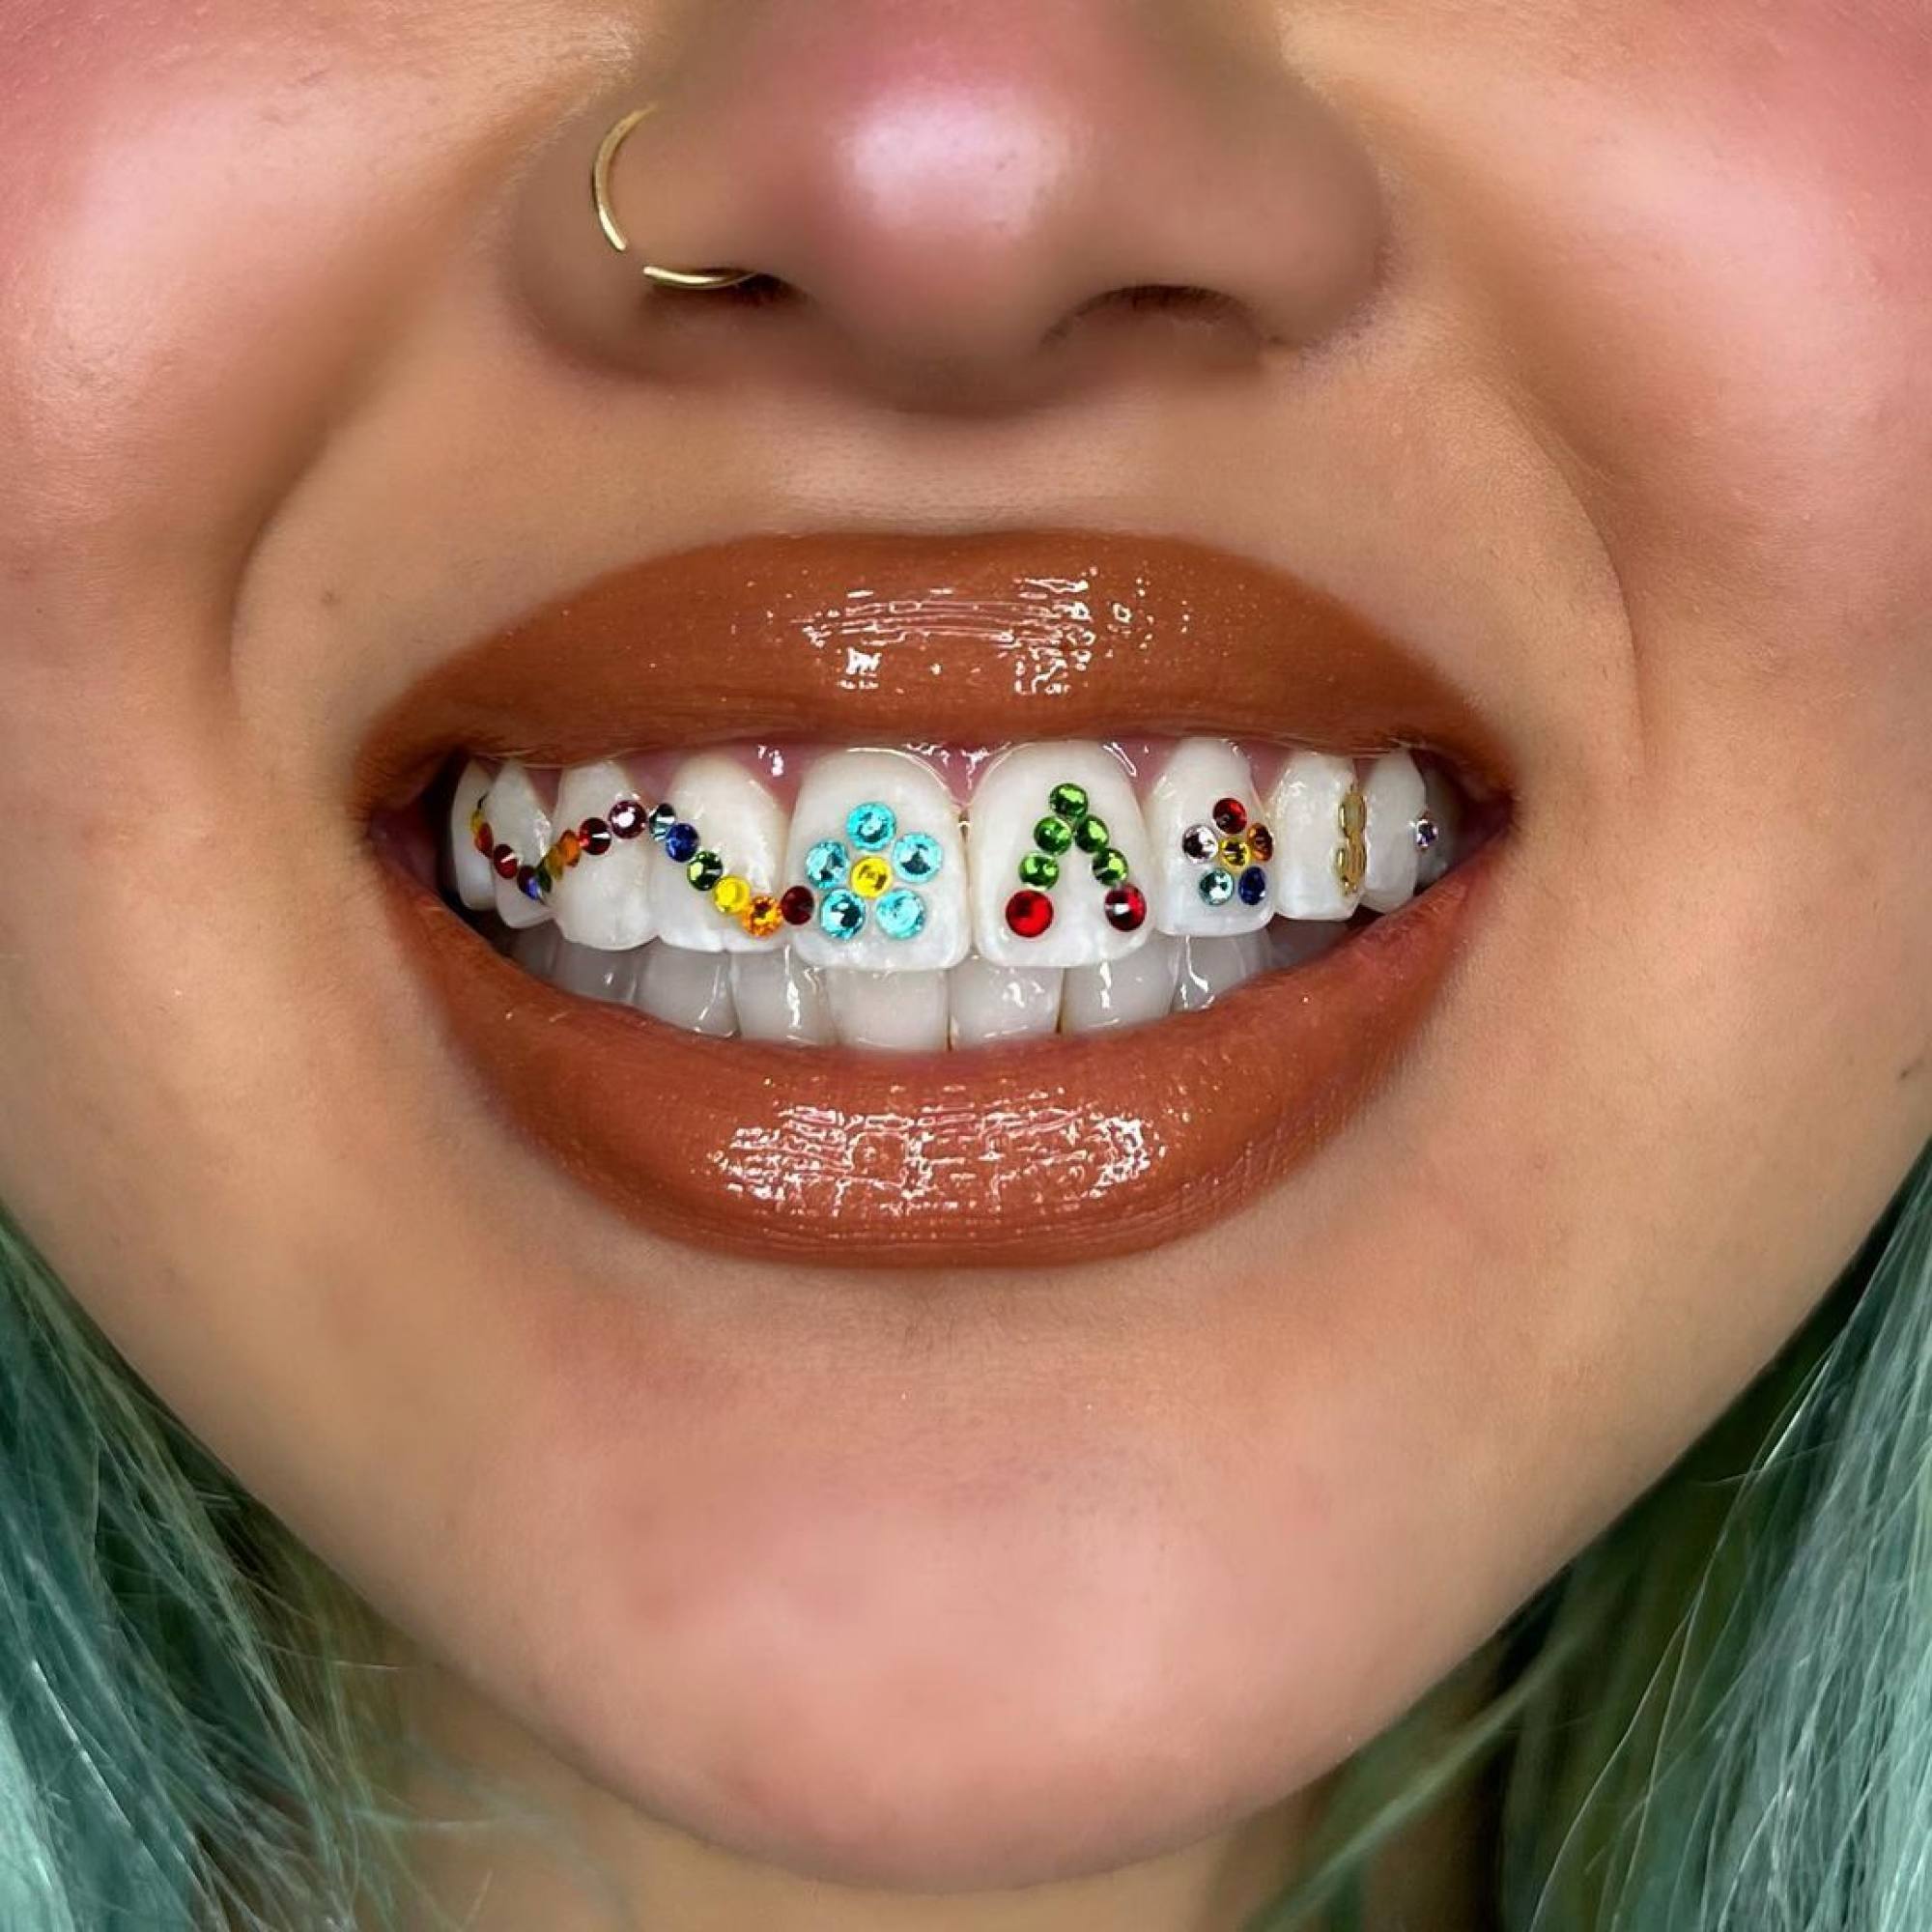 Drake, Katy Perry, Hailey Bieber: tooth gems go viral as celebs and TikTok  stars show off sparkly stones in their smiles